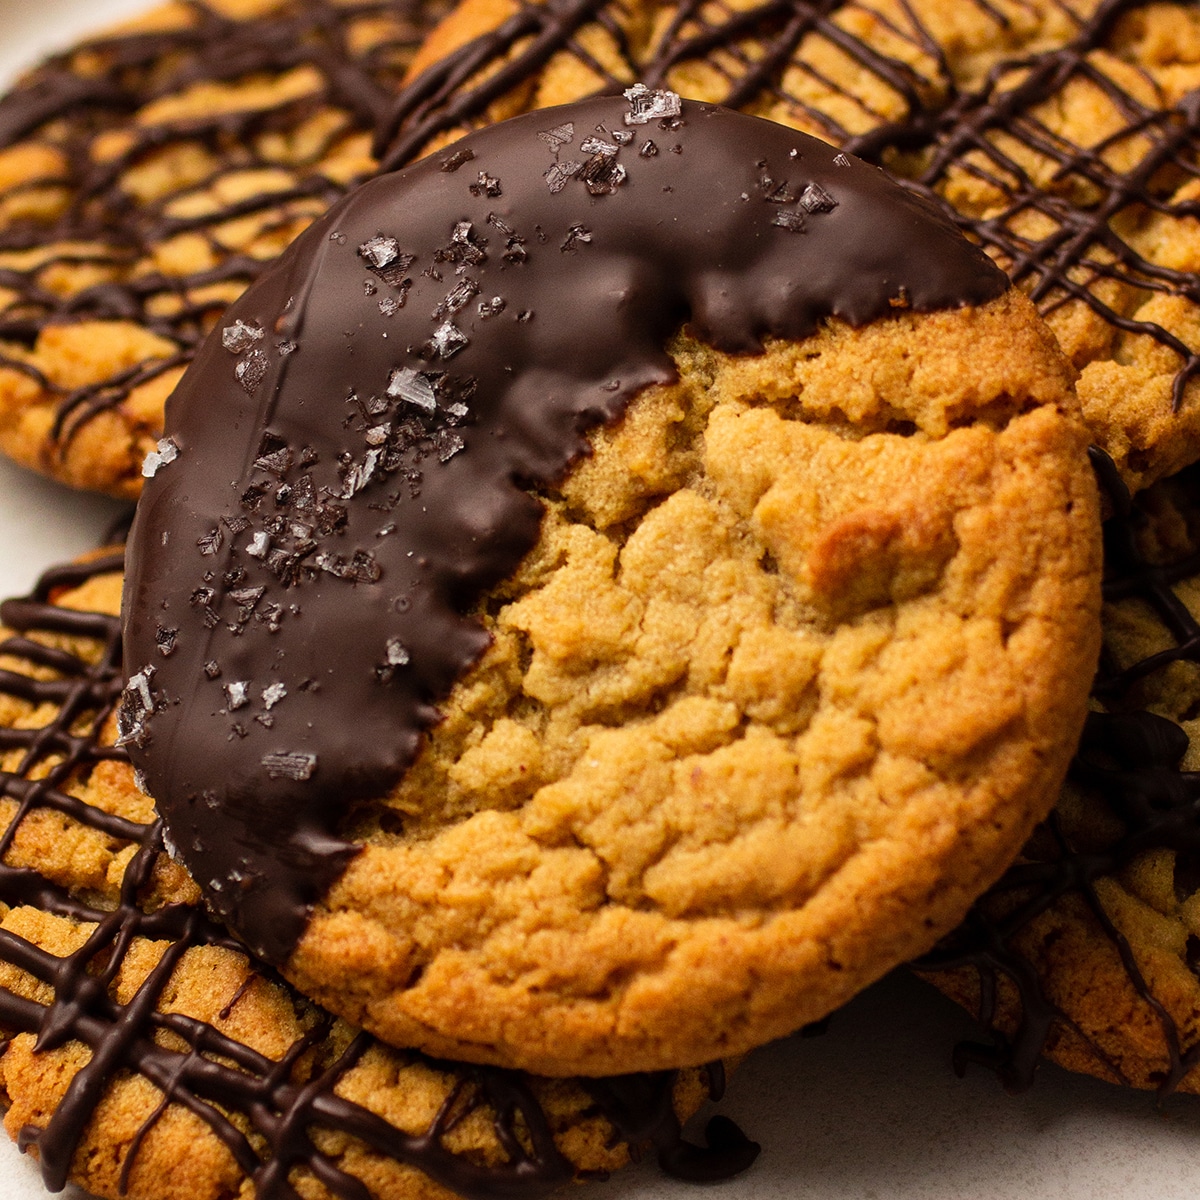 Chocolate dipped peanut butter cookie on top of several cookies drizzled with chocolate.